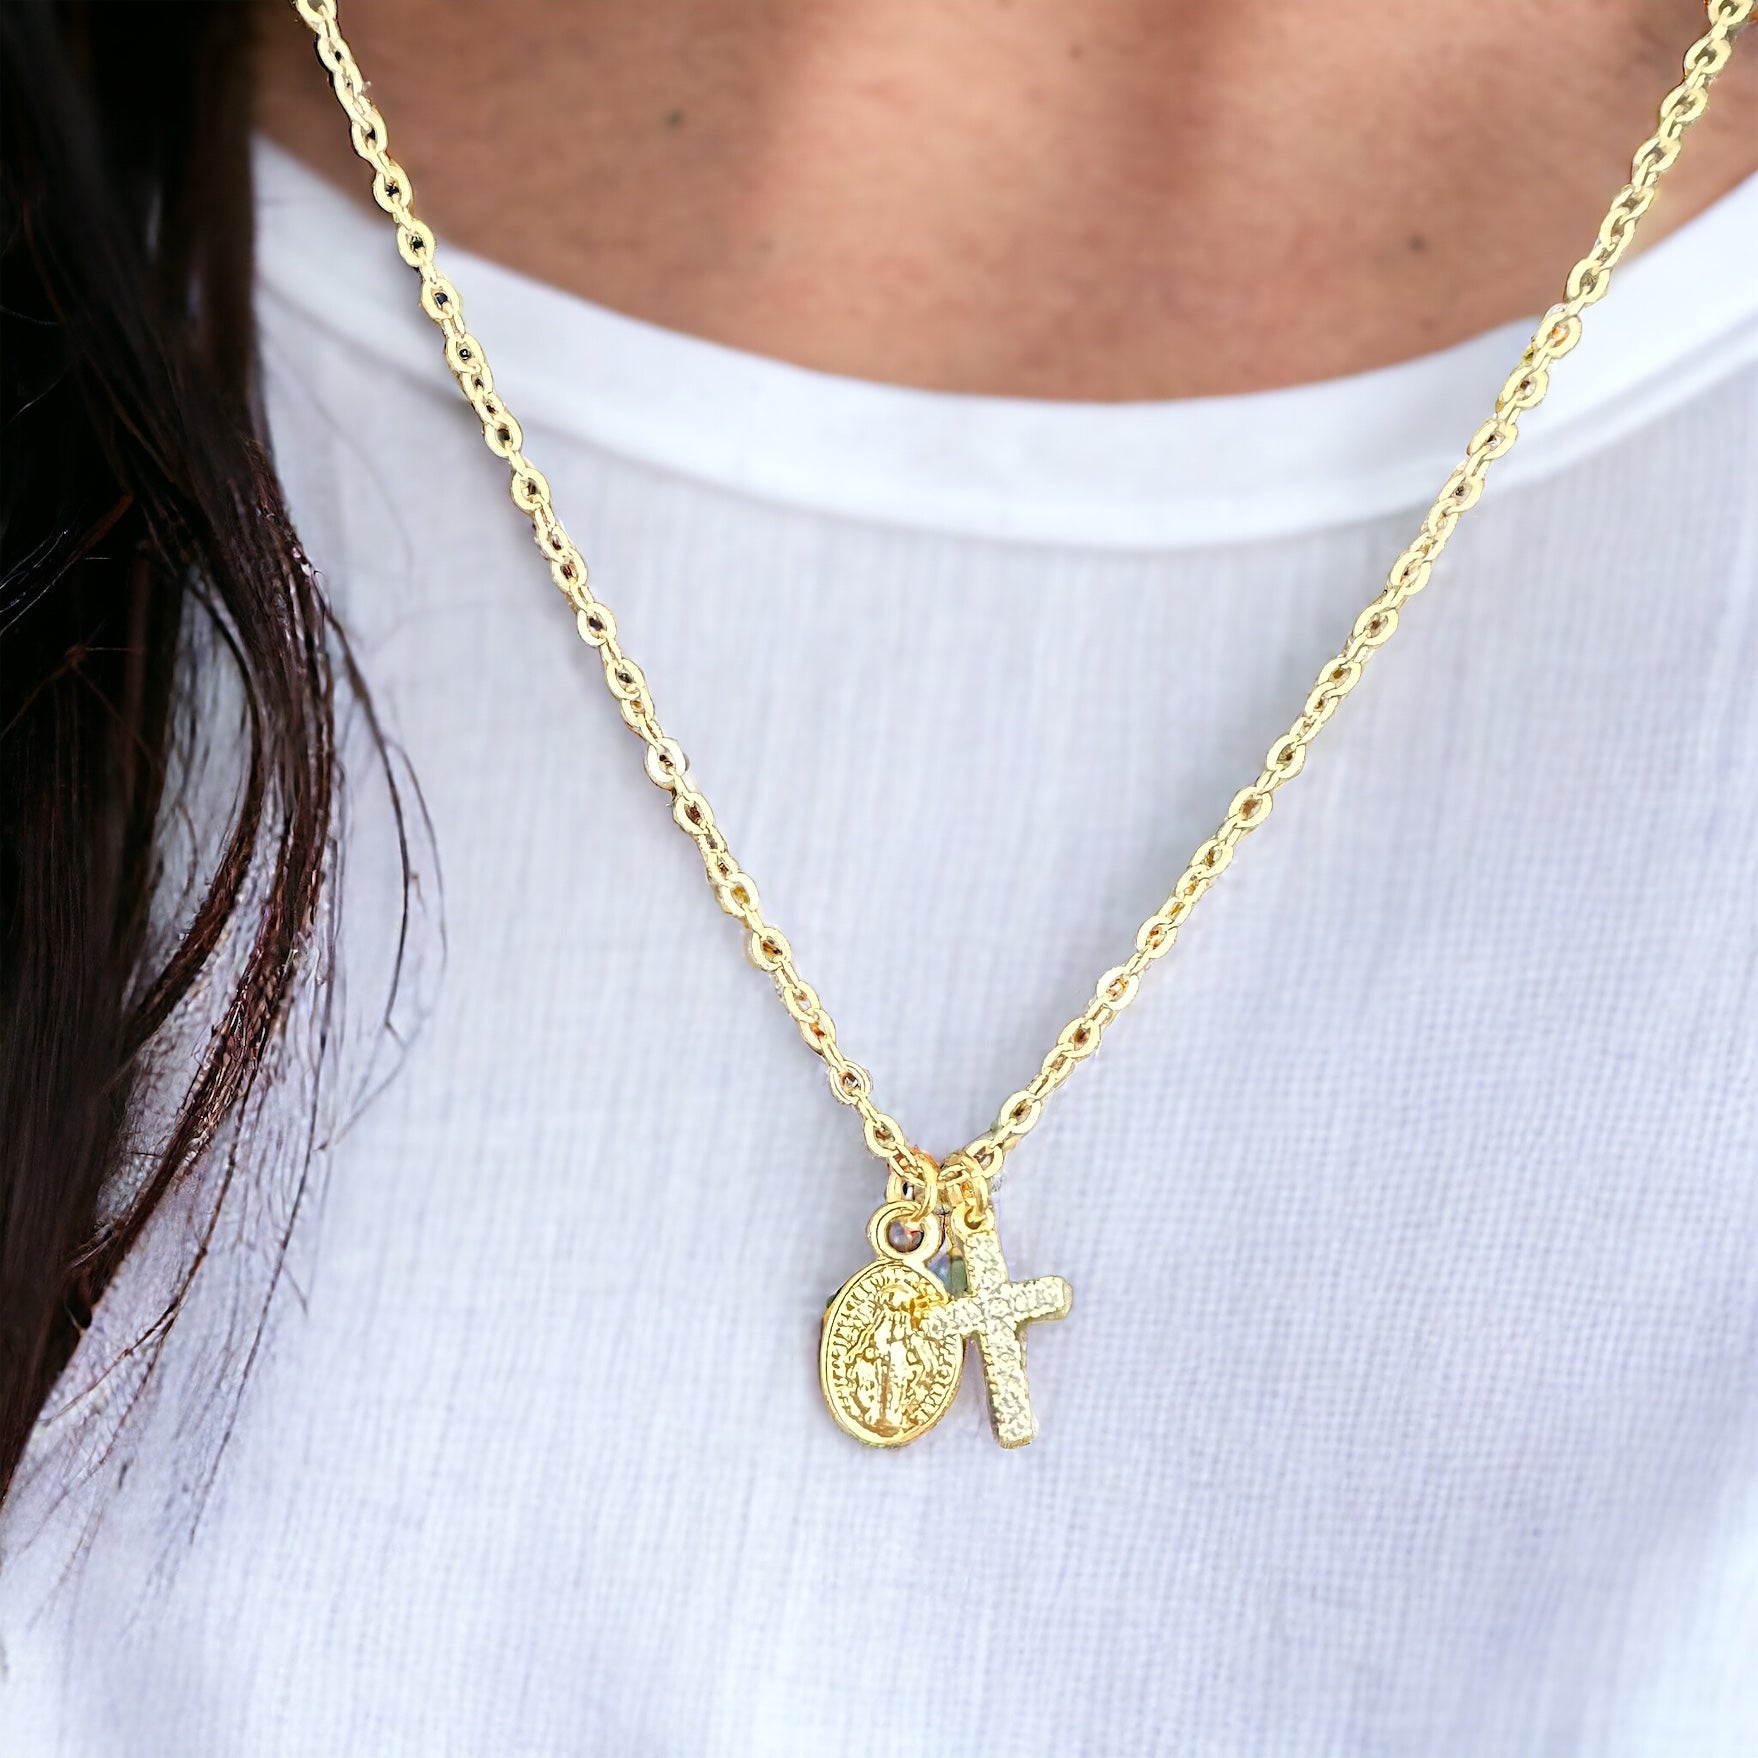 virgin mary necklace, gold mary necklace, gold mary jewelry, madonna necklace, blessed mother, baptism gift, communion gift for her, confirmation gift for her, miraculous medal necklace, dainty tiny virgin mary necklace, religious necklace